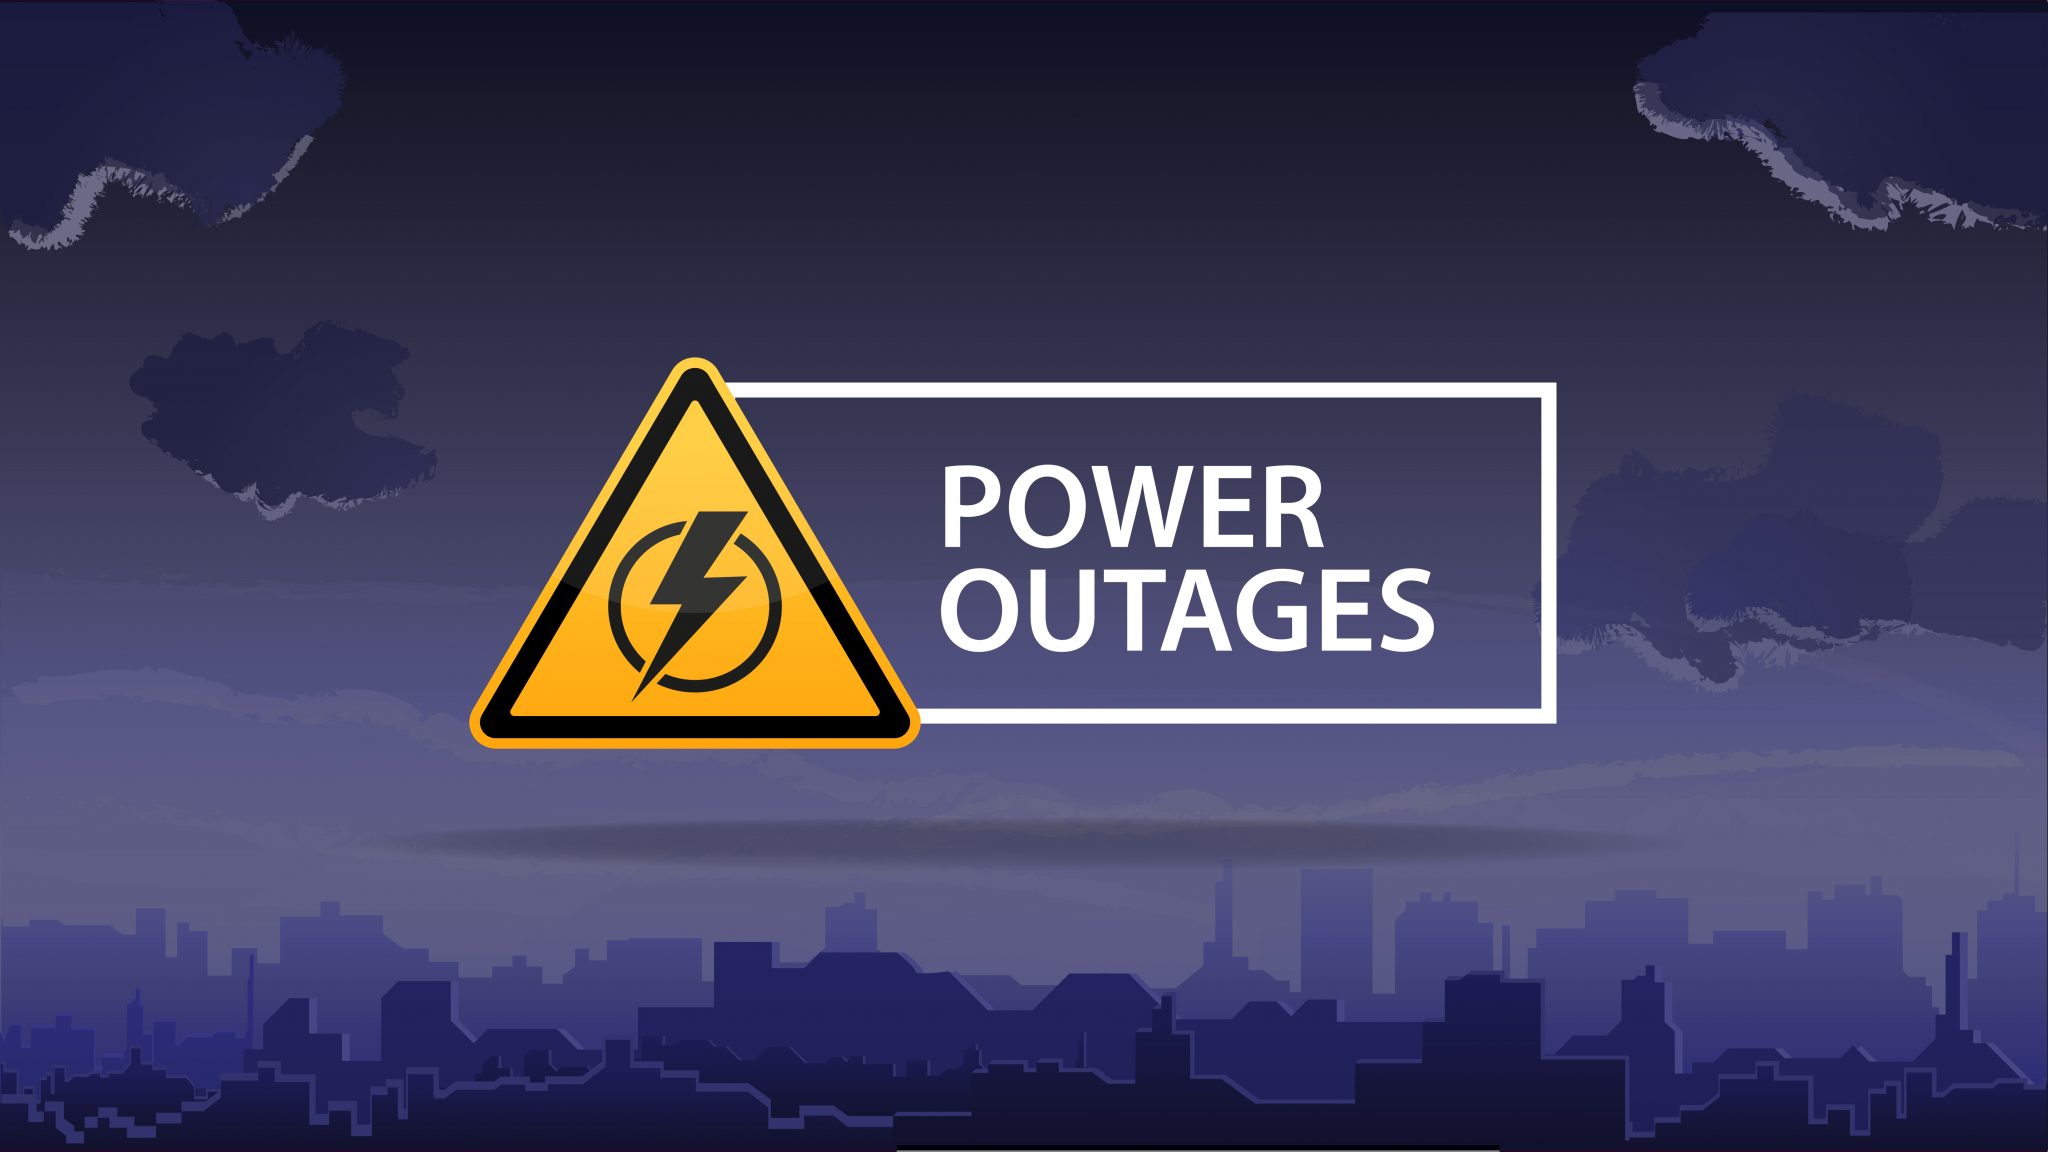 https://www.aces.edu/wp-content/uploads/2018/12/power-outage.jpg